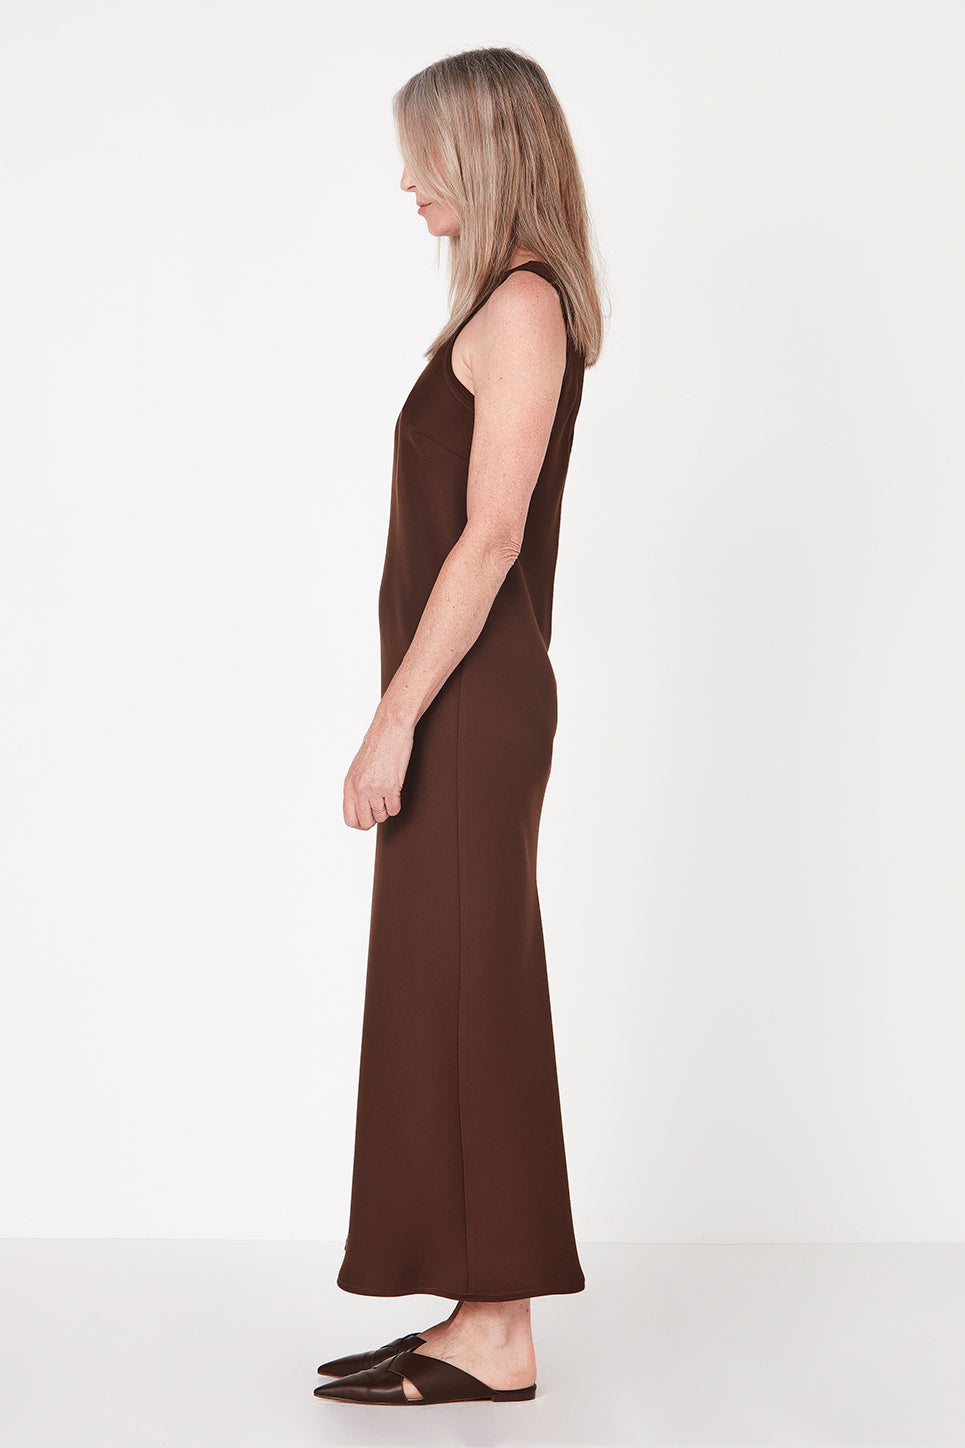 The Quinn Dress in Chocolate